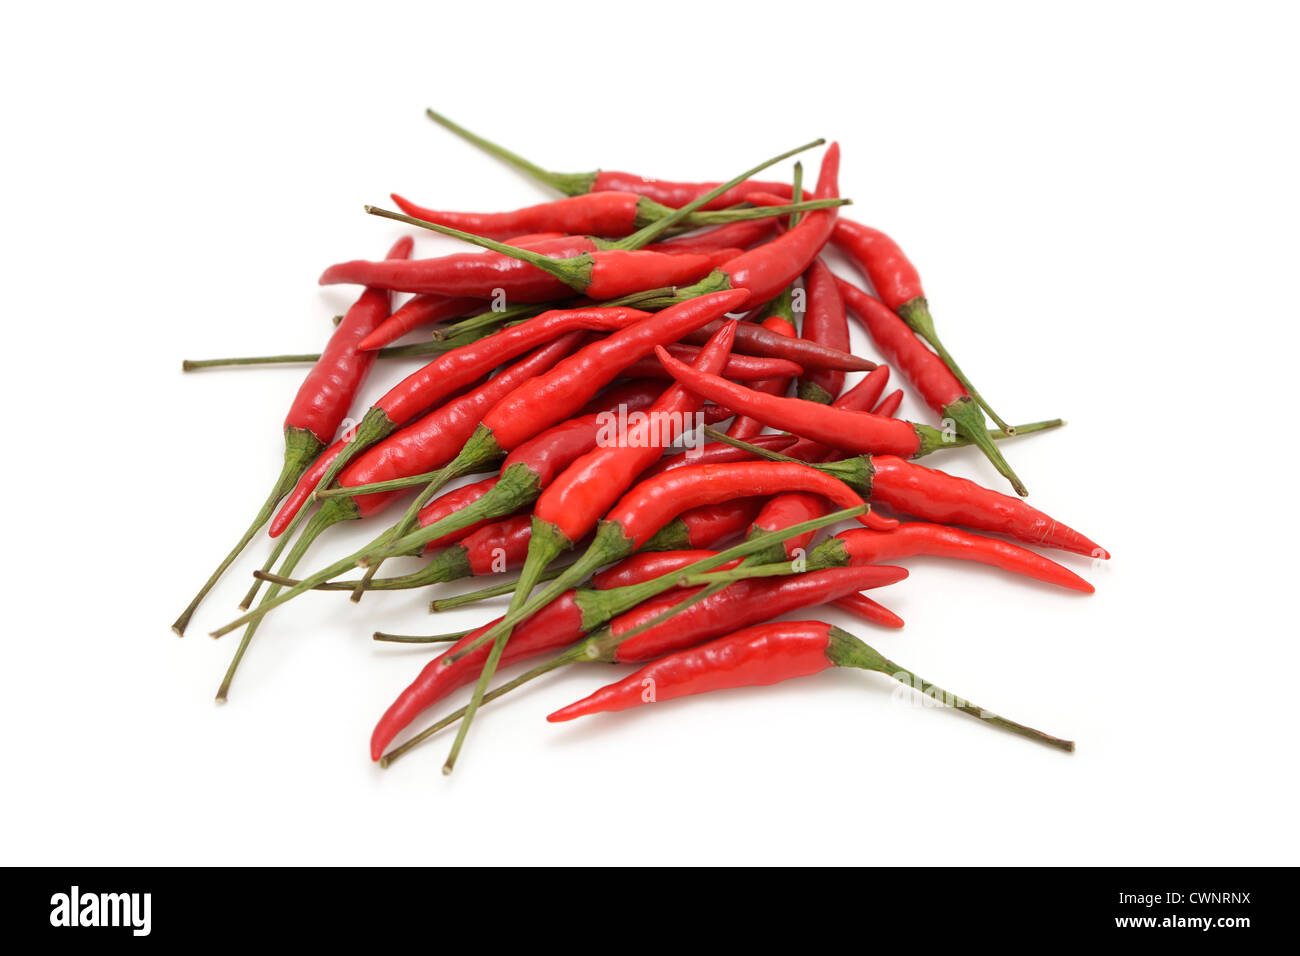 Red Chili Peppers, Hot Thai Chilis Stockfoto